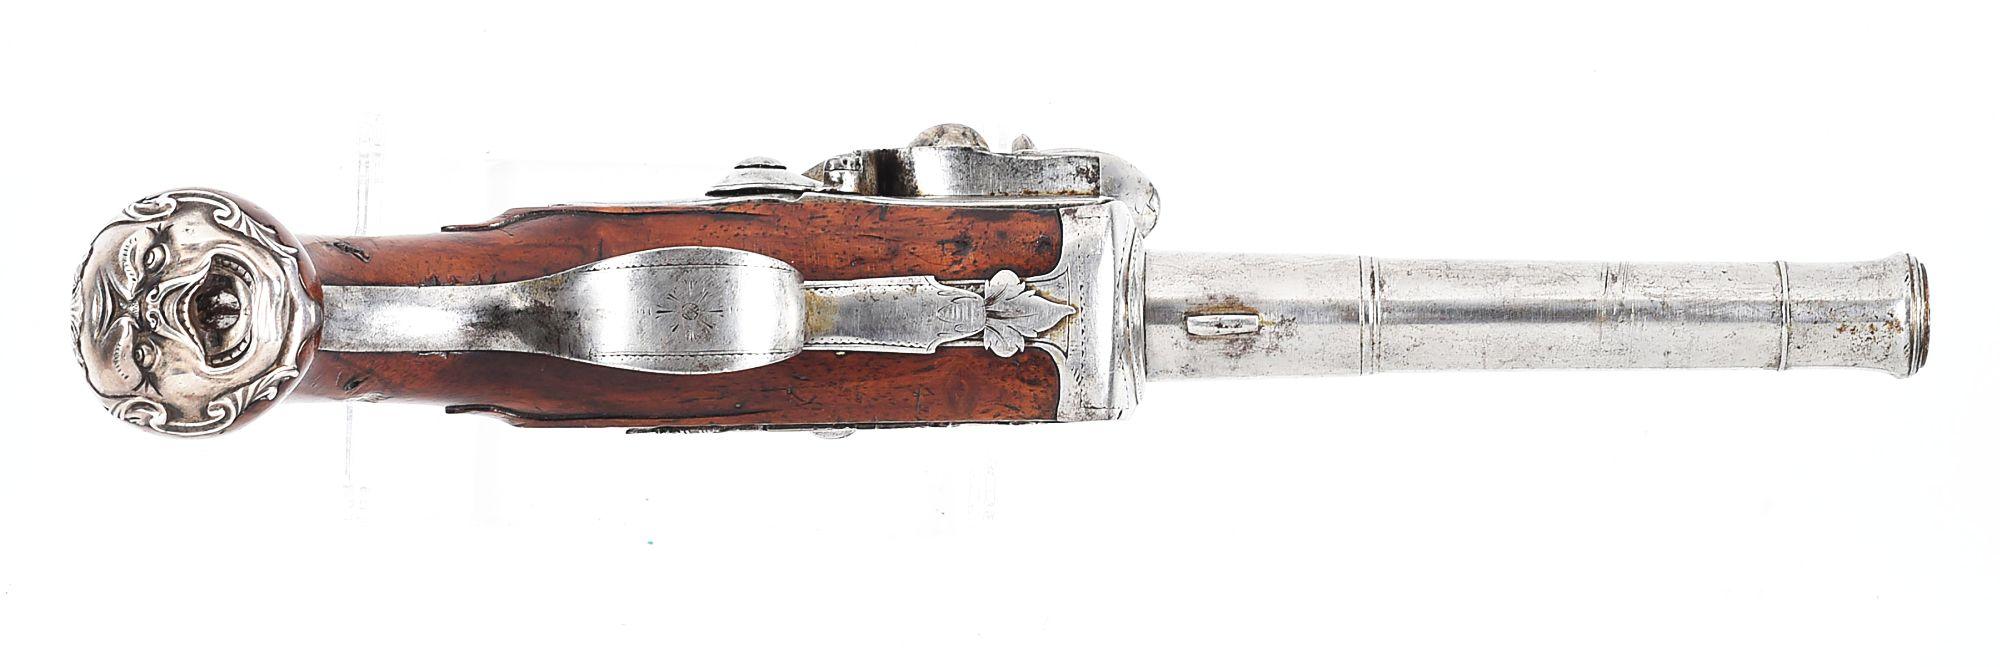 (A) FINE ENGLISH SILVER MOUNTED QUEEN ANNE FLINTLOCK OFFICER'S PISTOL BY ISAAC SMITH.